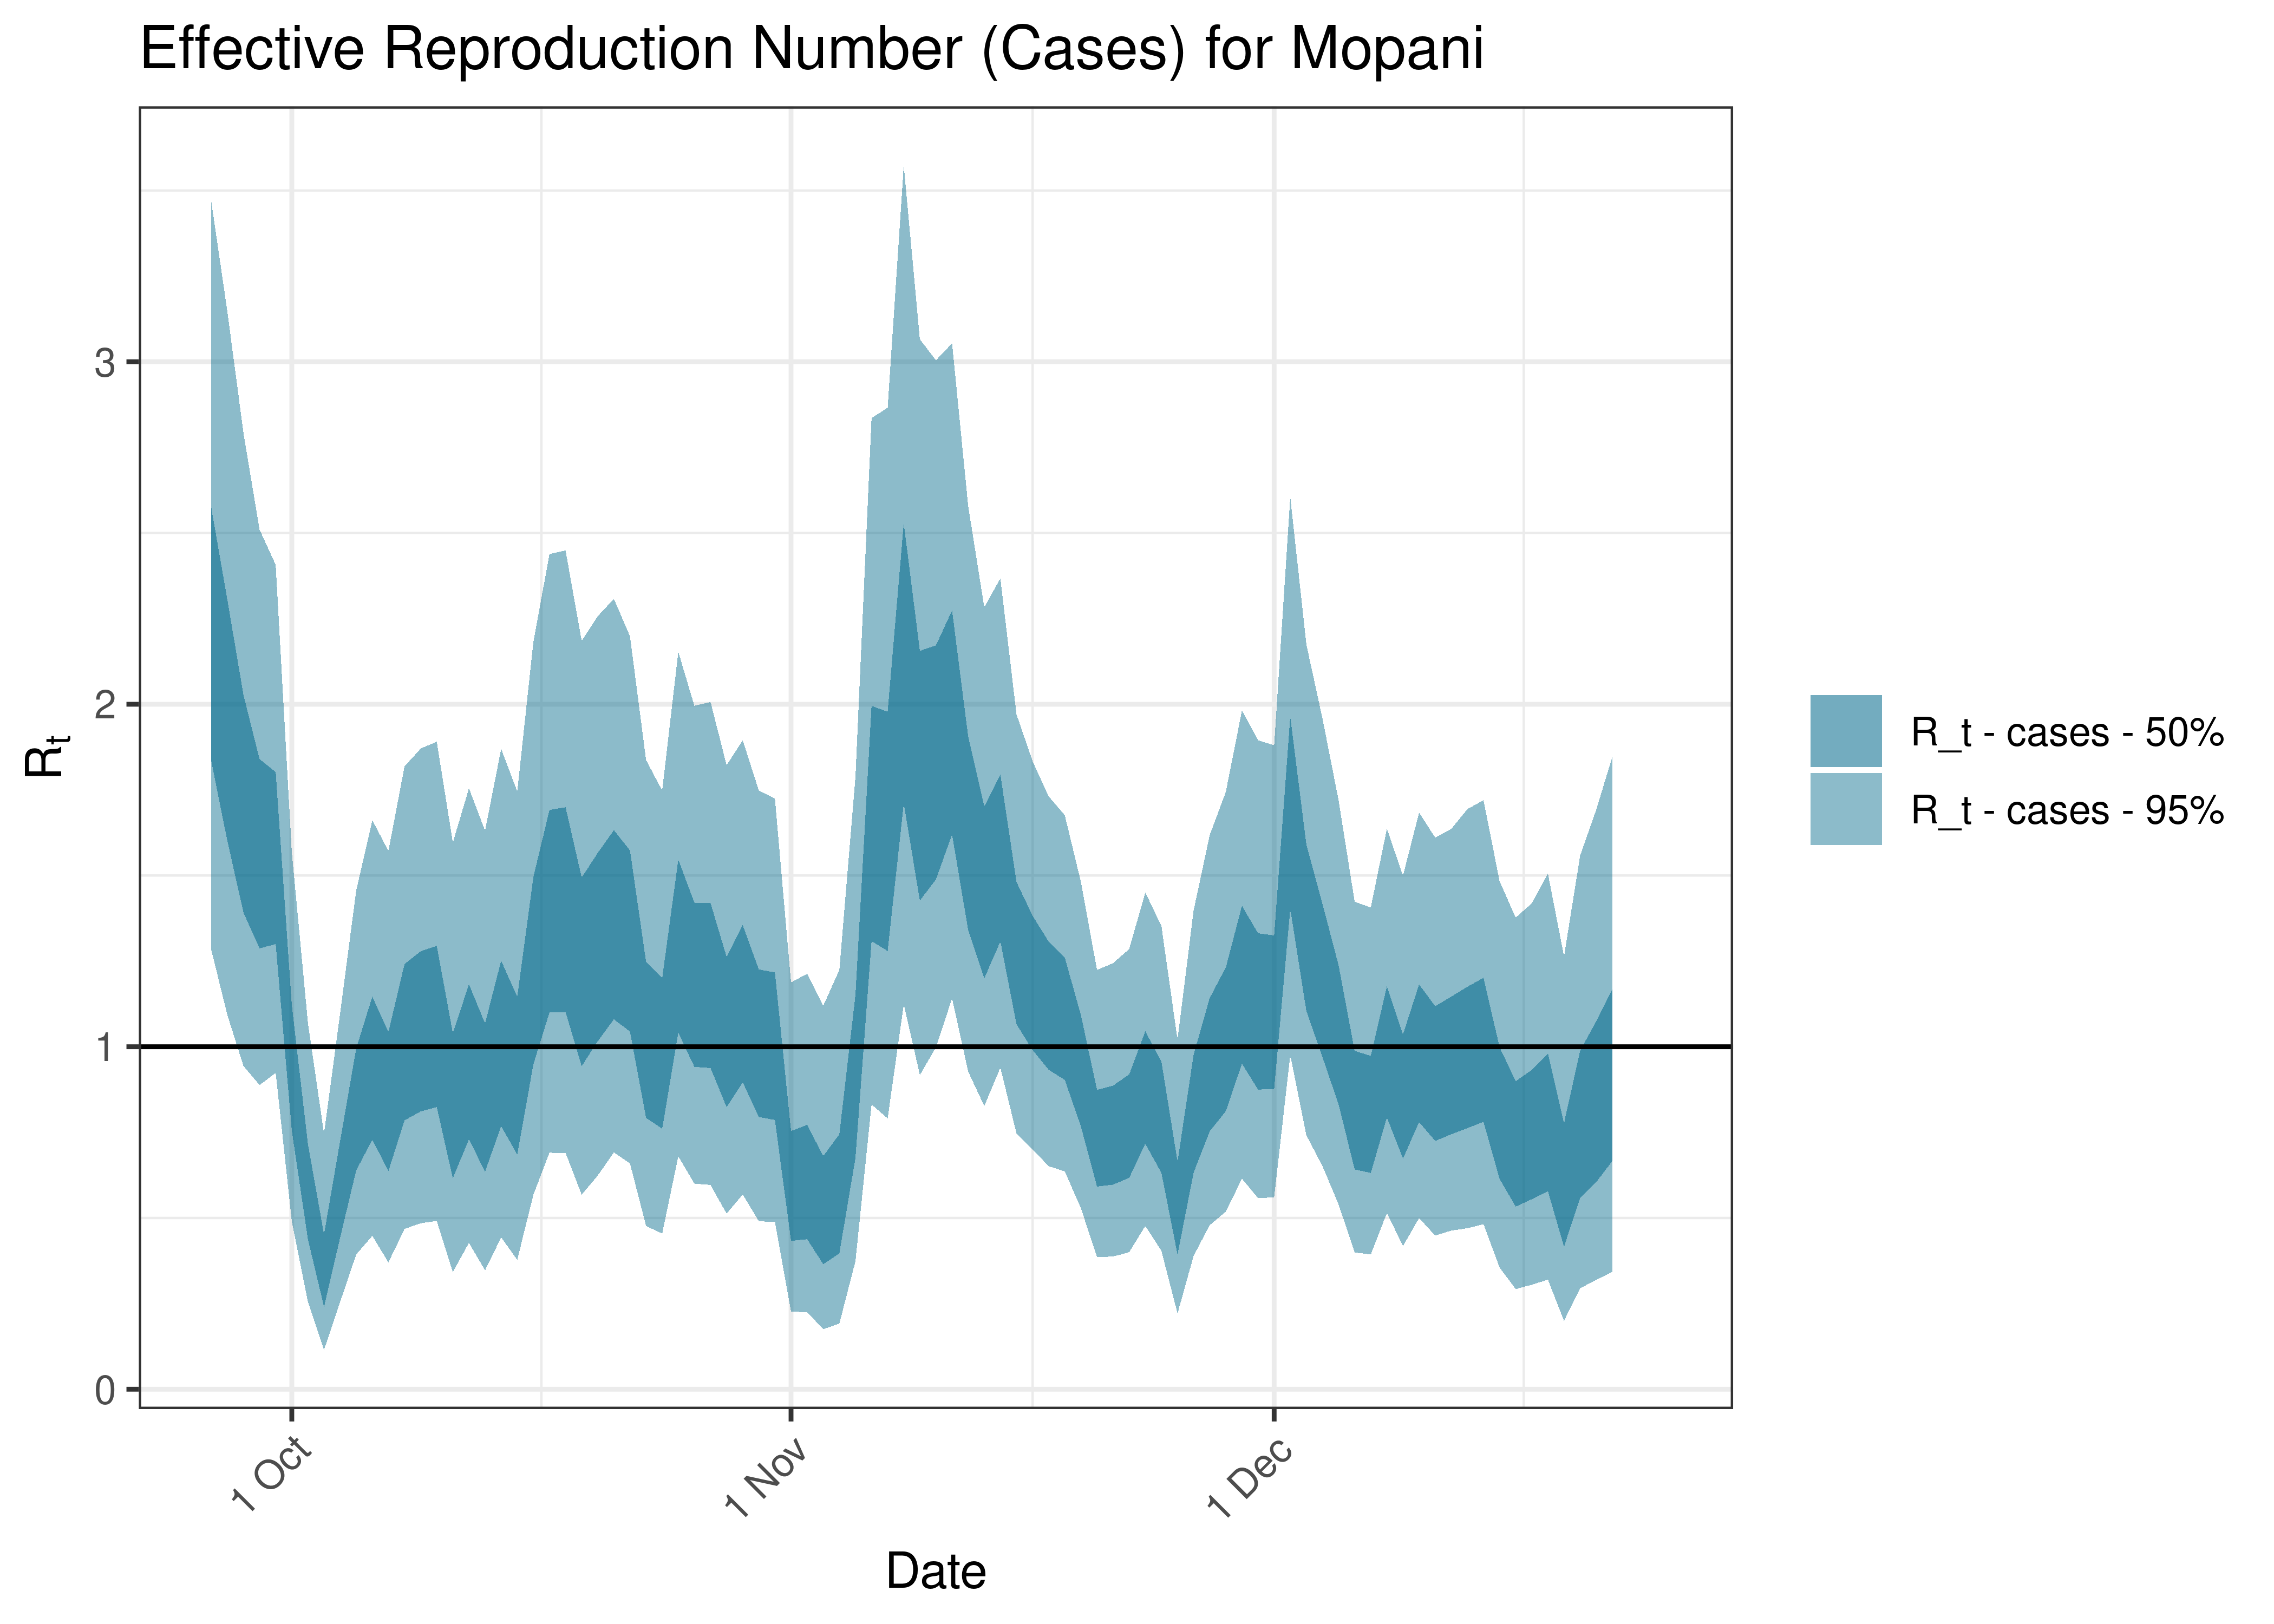 Estimated Effective Reproduction Number Based on Cases for Mopani over last 90 days